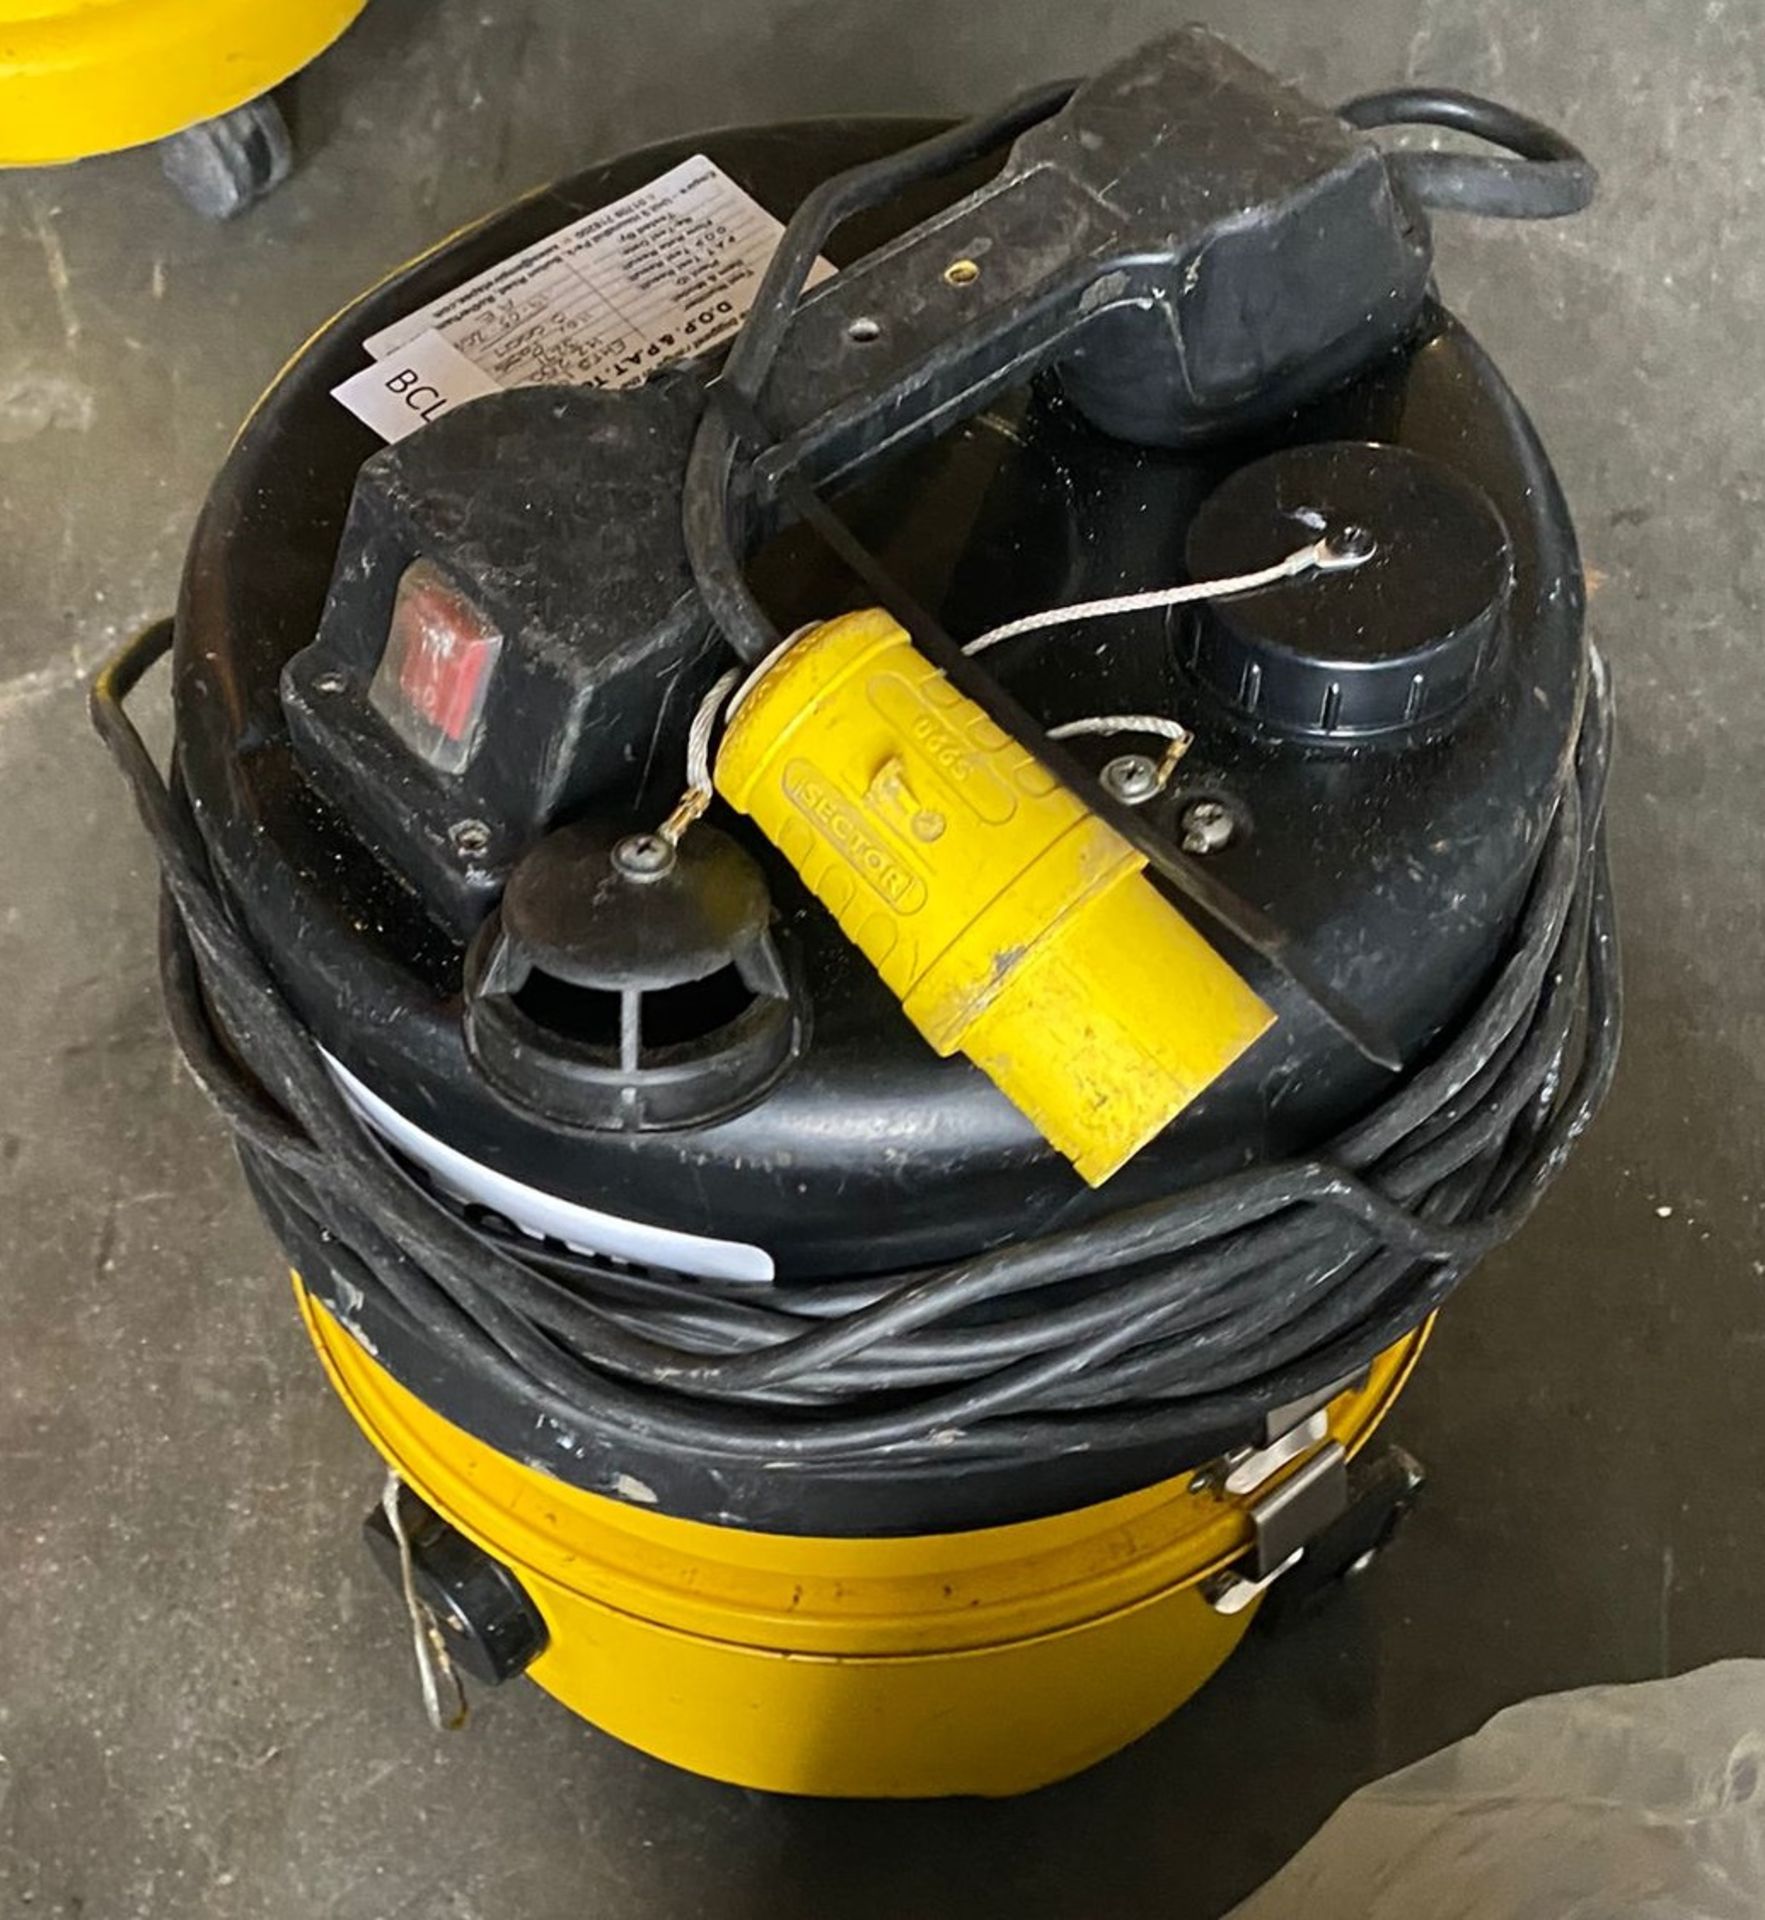 1 x Numatic HZ200 Hazardous Materials Vacuum Cleaner - Tested and Working - RRP £480 - CL704 - - Image 2 of 2